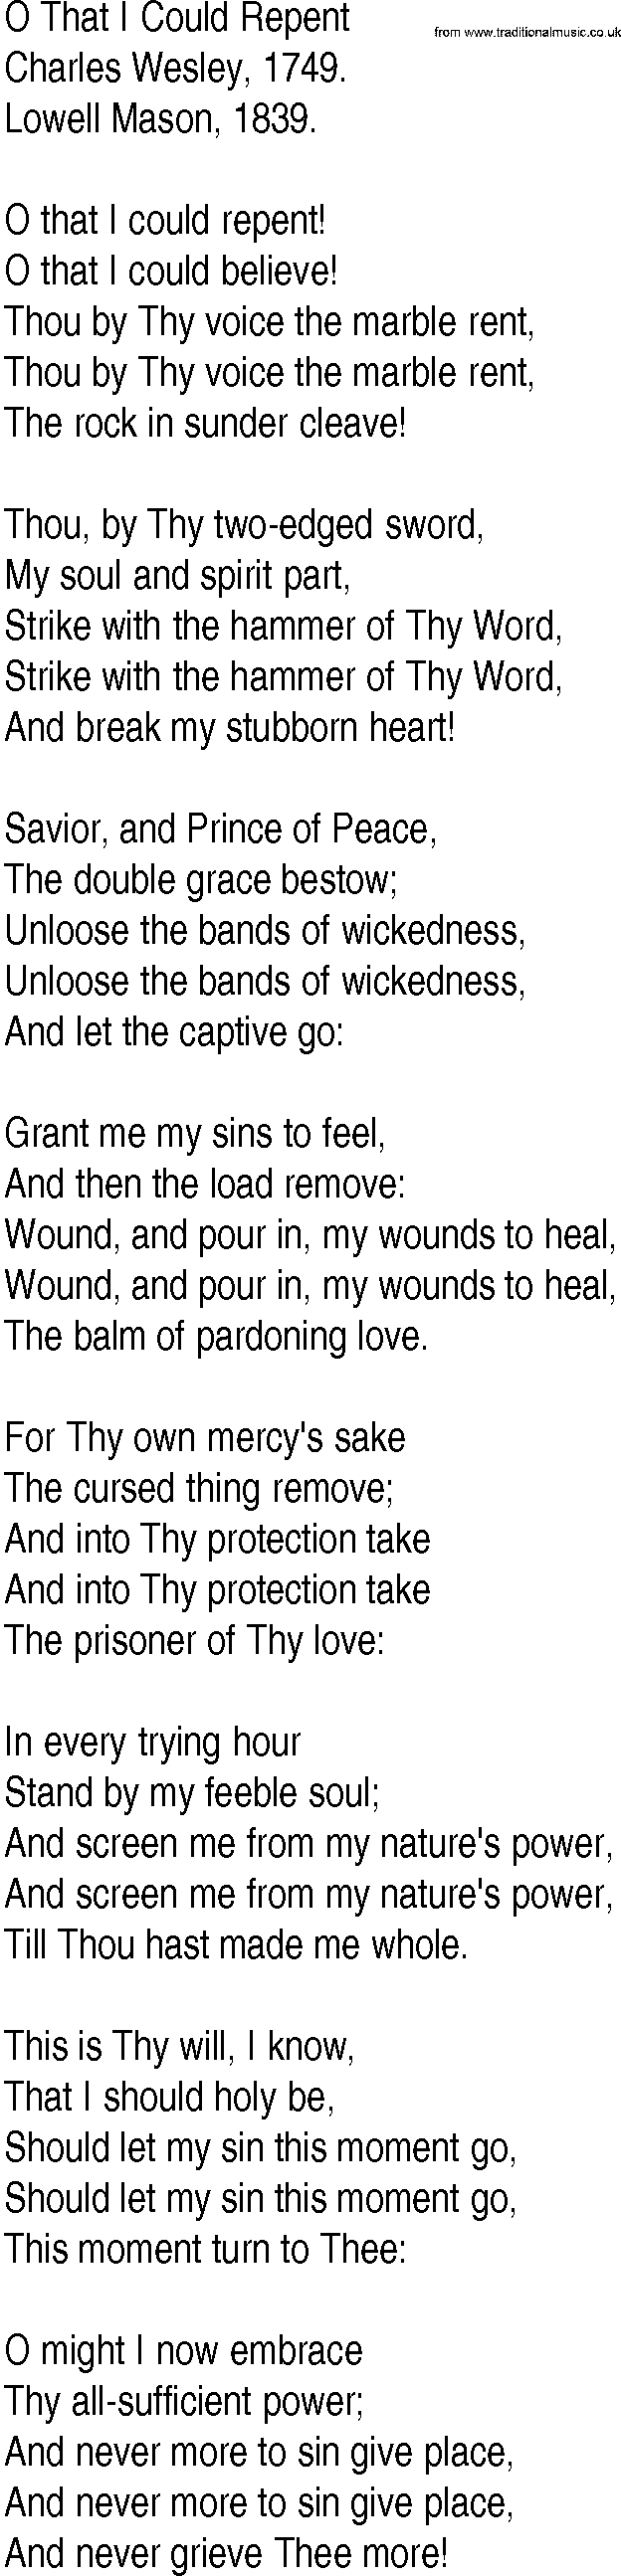 Hymn and Gospel Song: O That I Could Repent by Charles Wesley lyrics